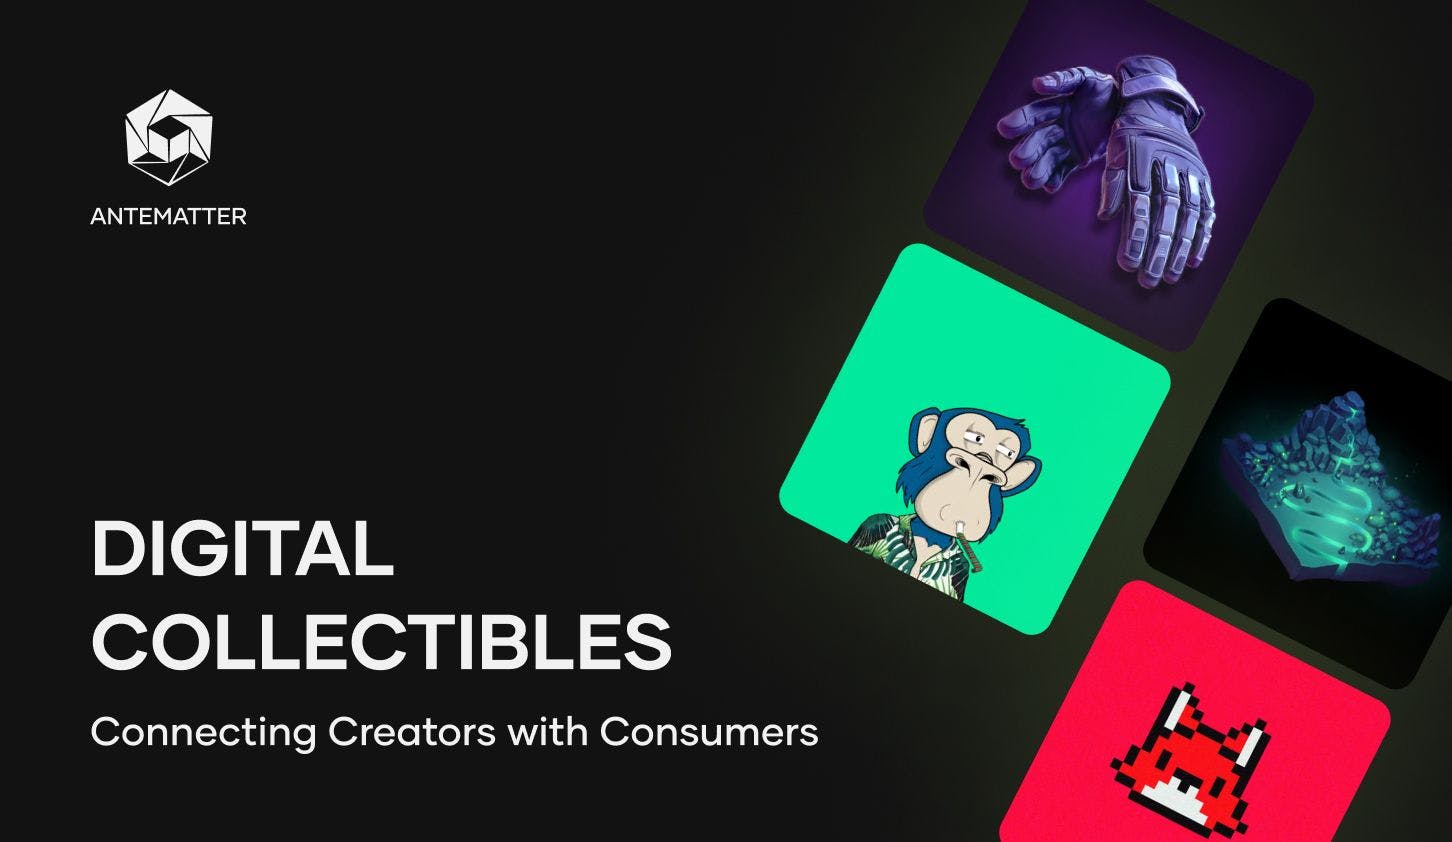 Connecting Creators with Consumers via Digital Collectibles